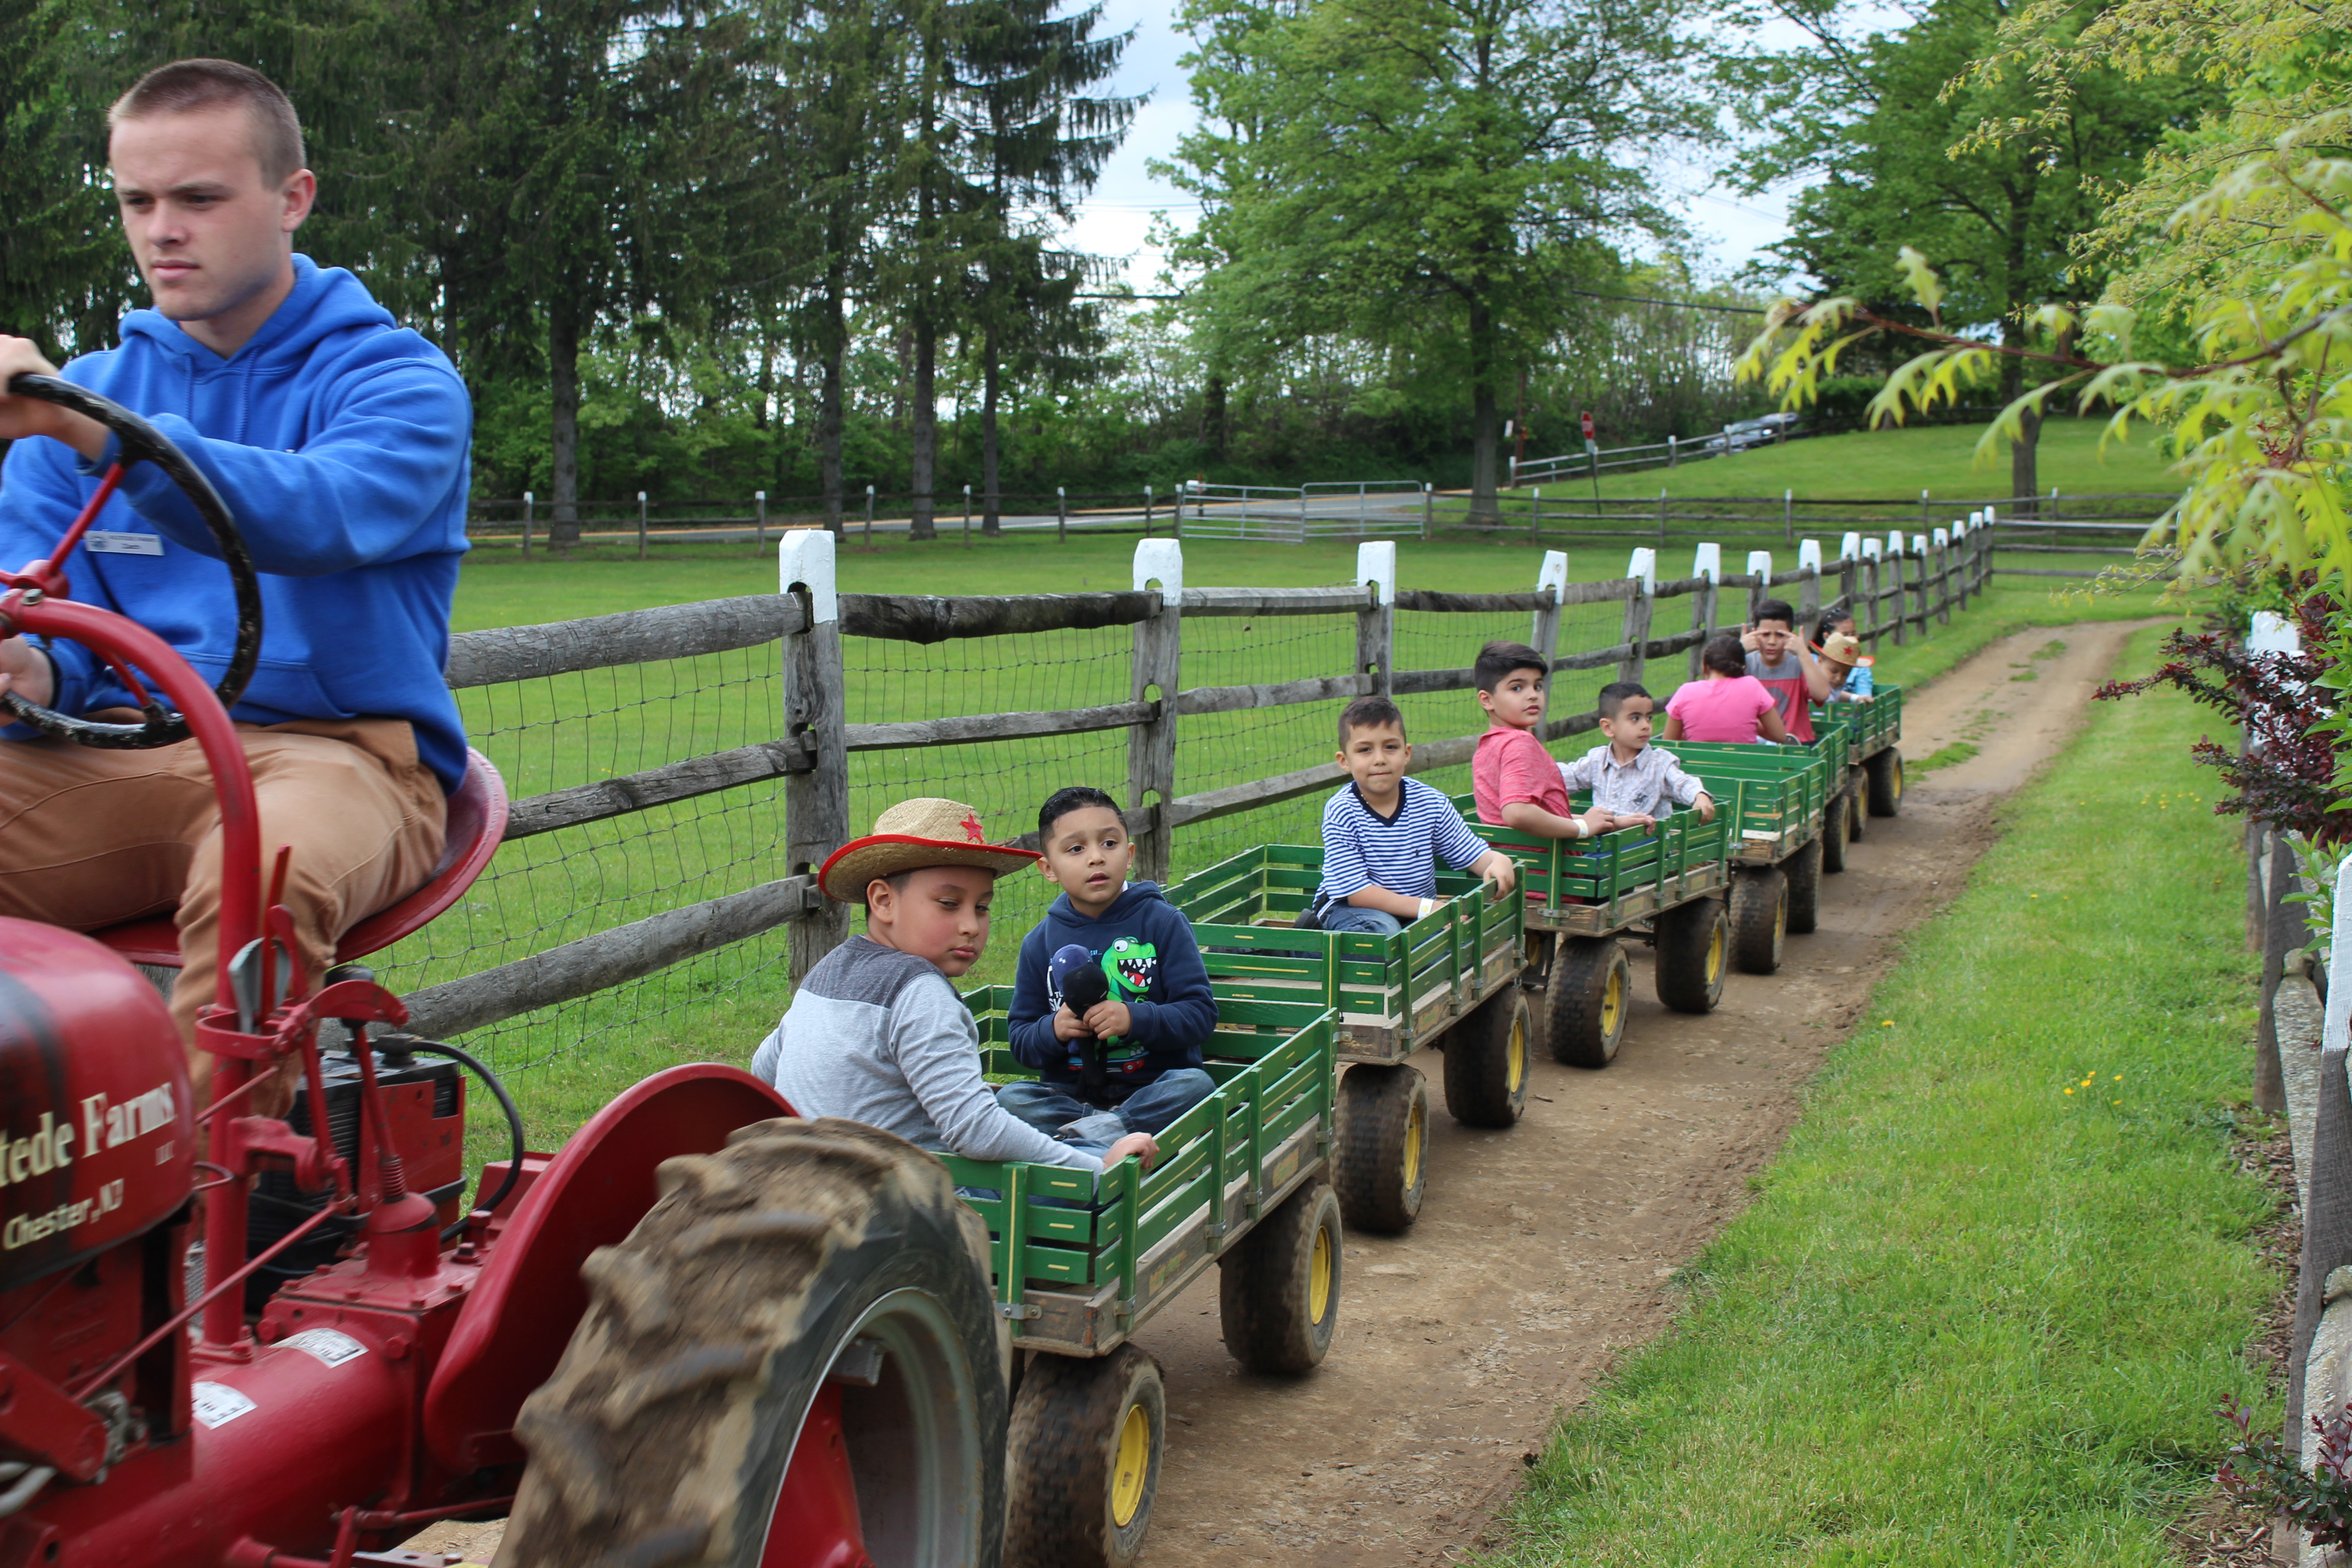 Tractor rides are very popular on U Pick weekends at Alstede Farms